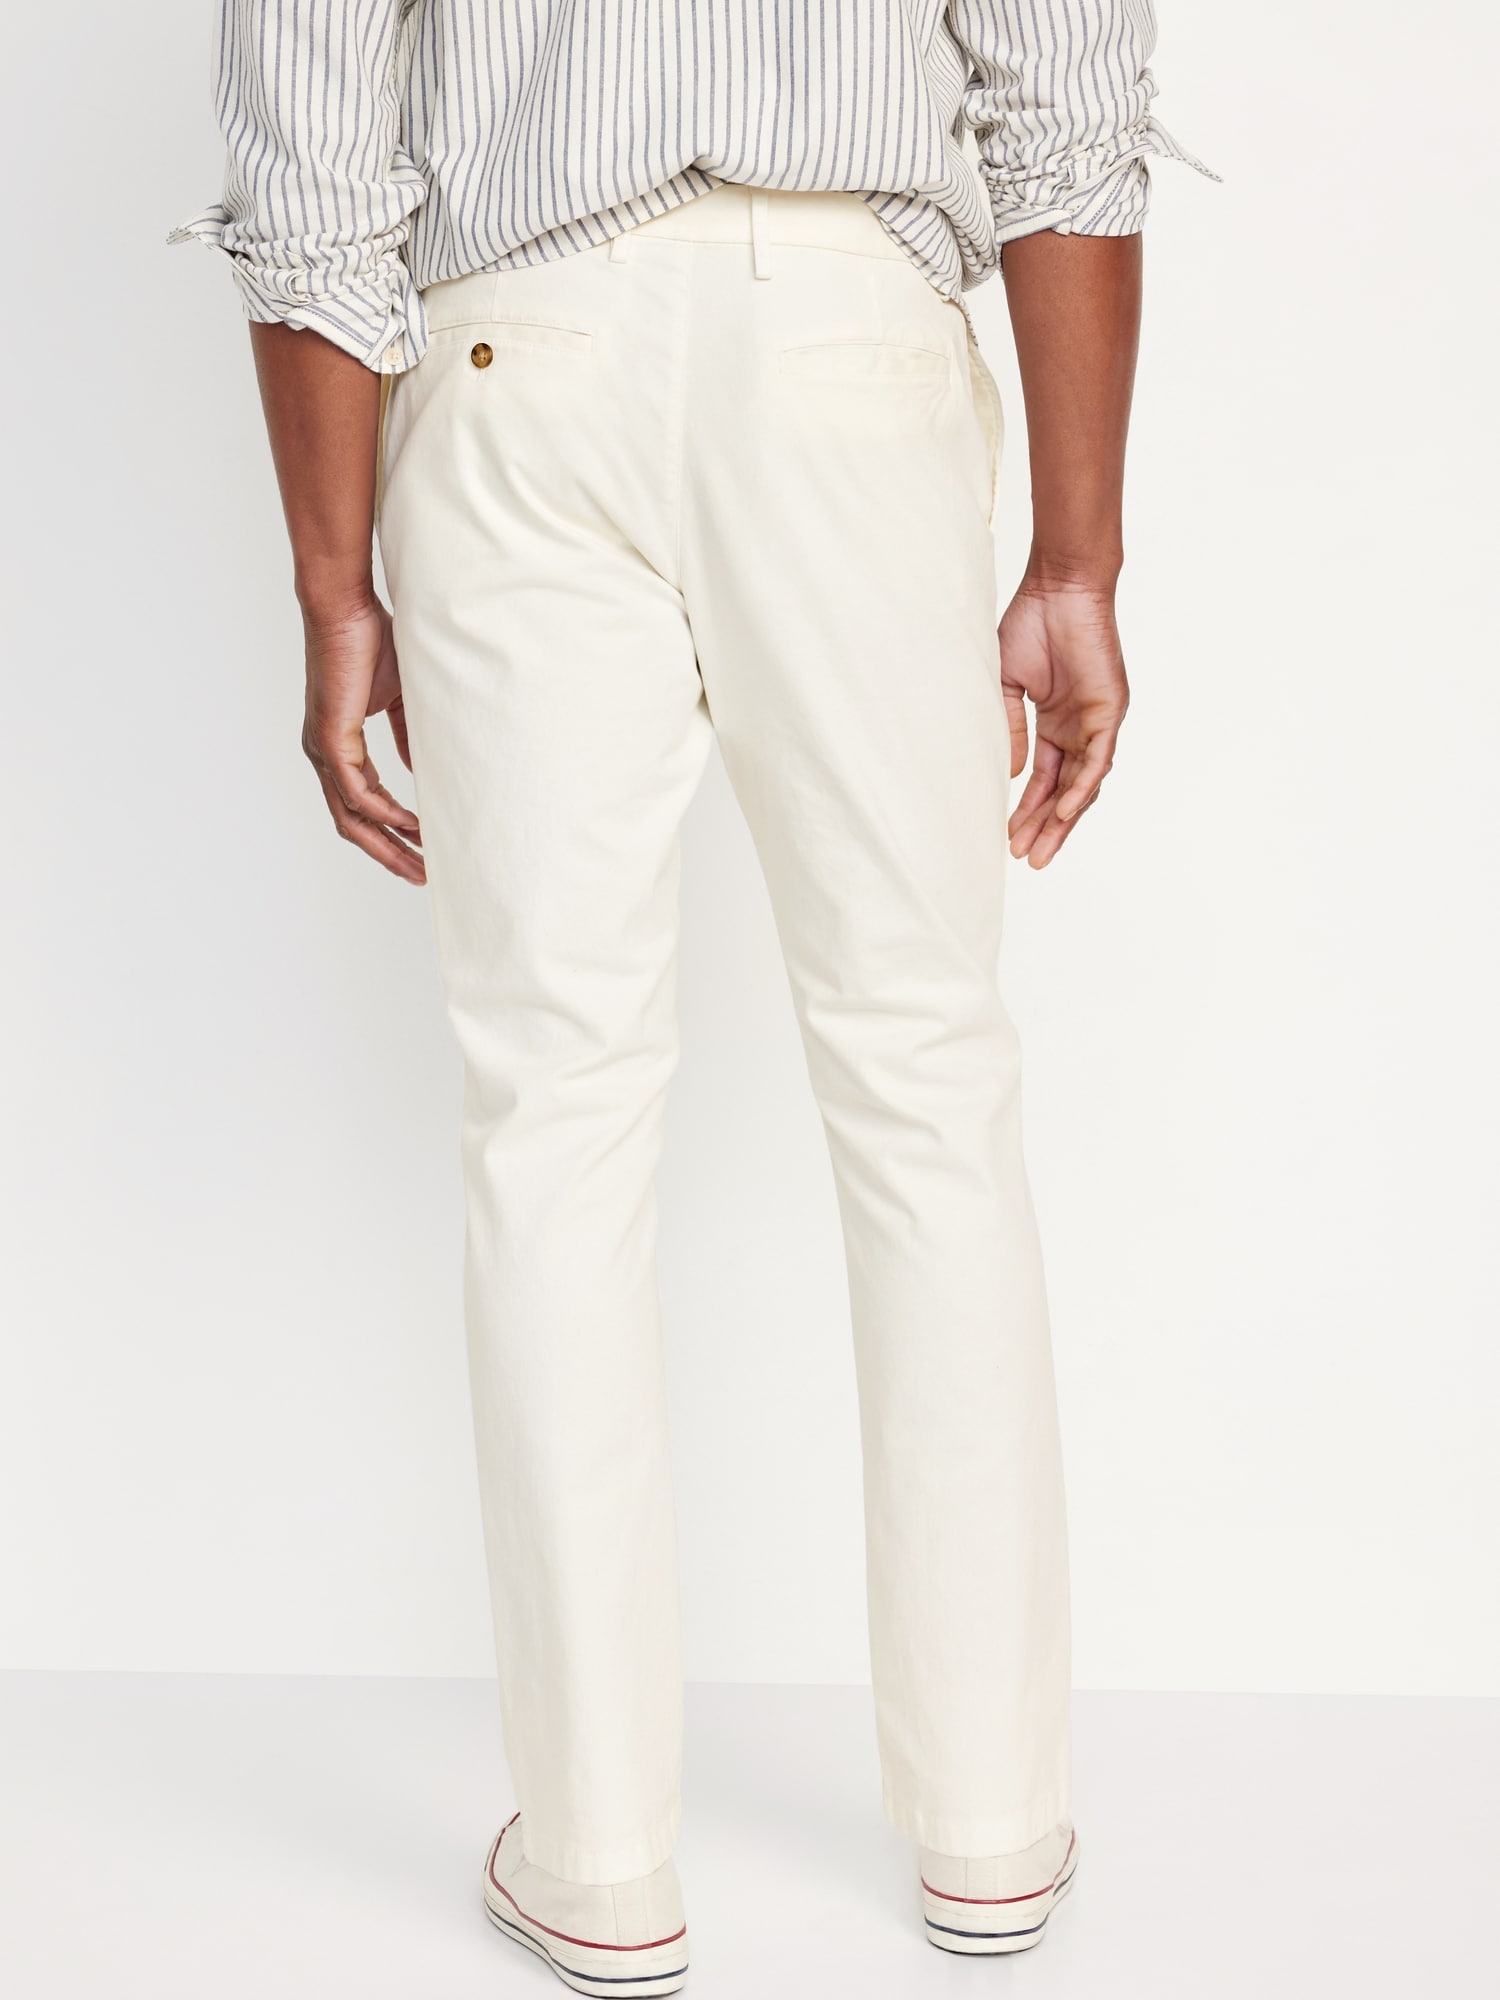 Straight Built-In Flex Rotation Chino Pants | Old Navy